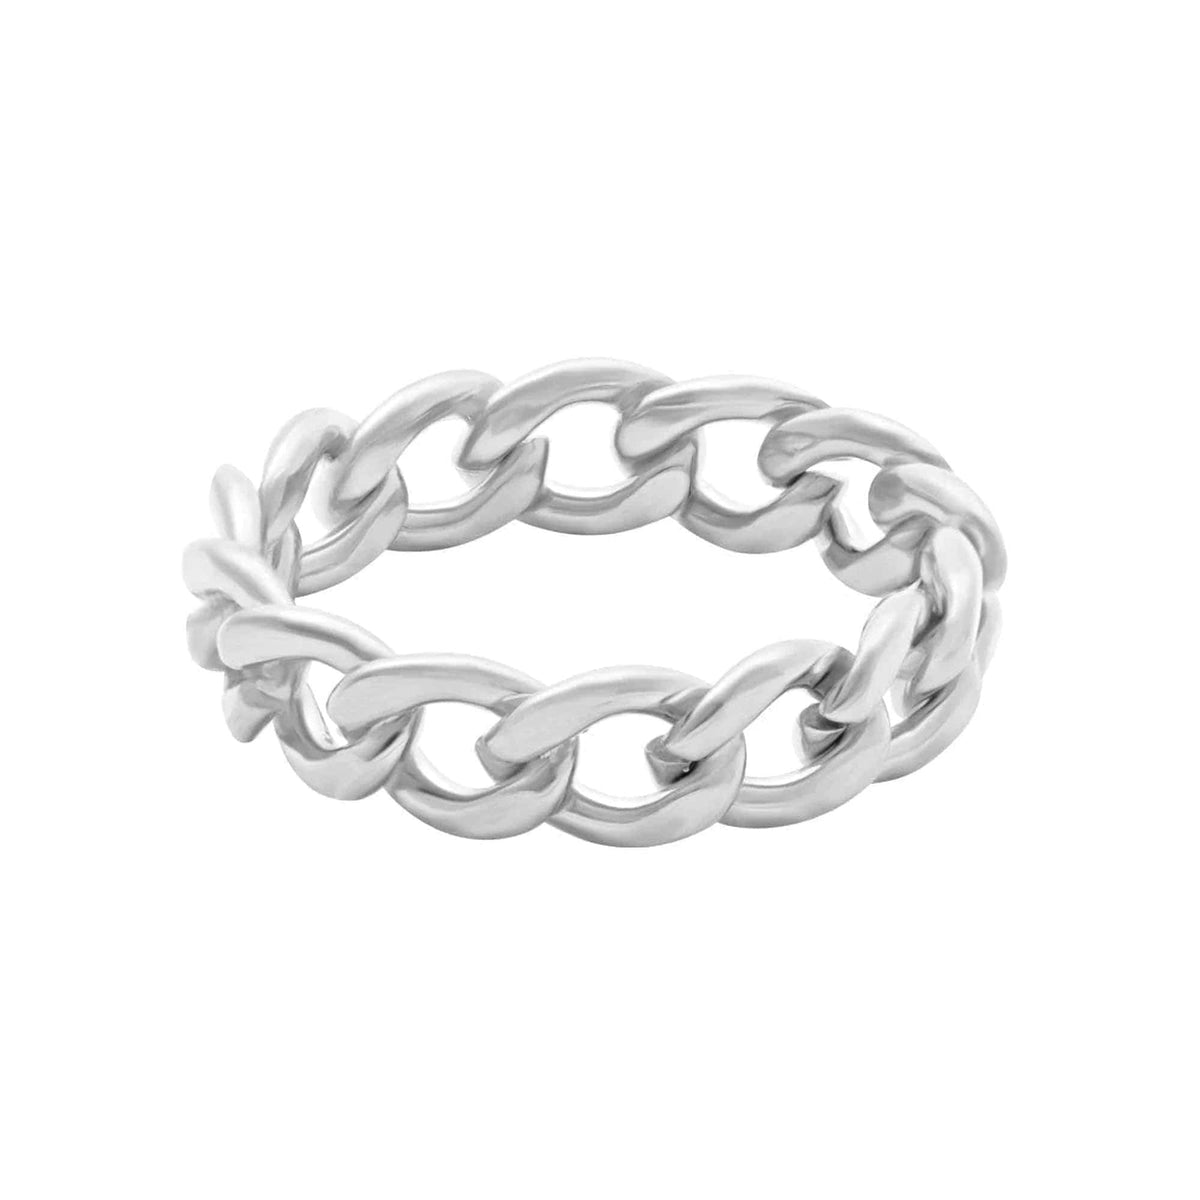 BohoMoon Stainless Steel Kenya Chain Ring Silver / US 6 / UK L / EUR 51 (small)